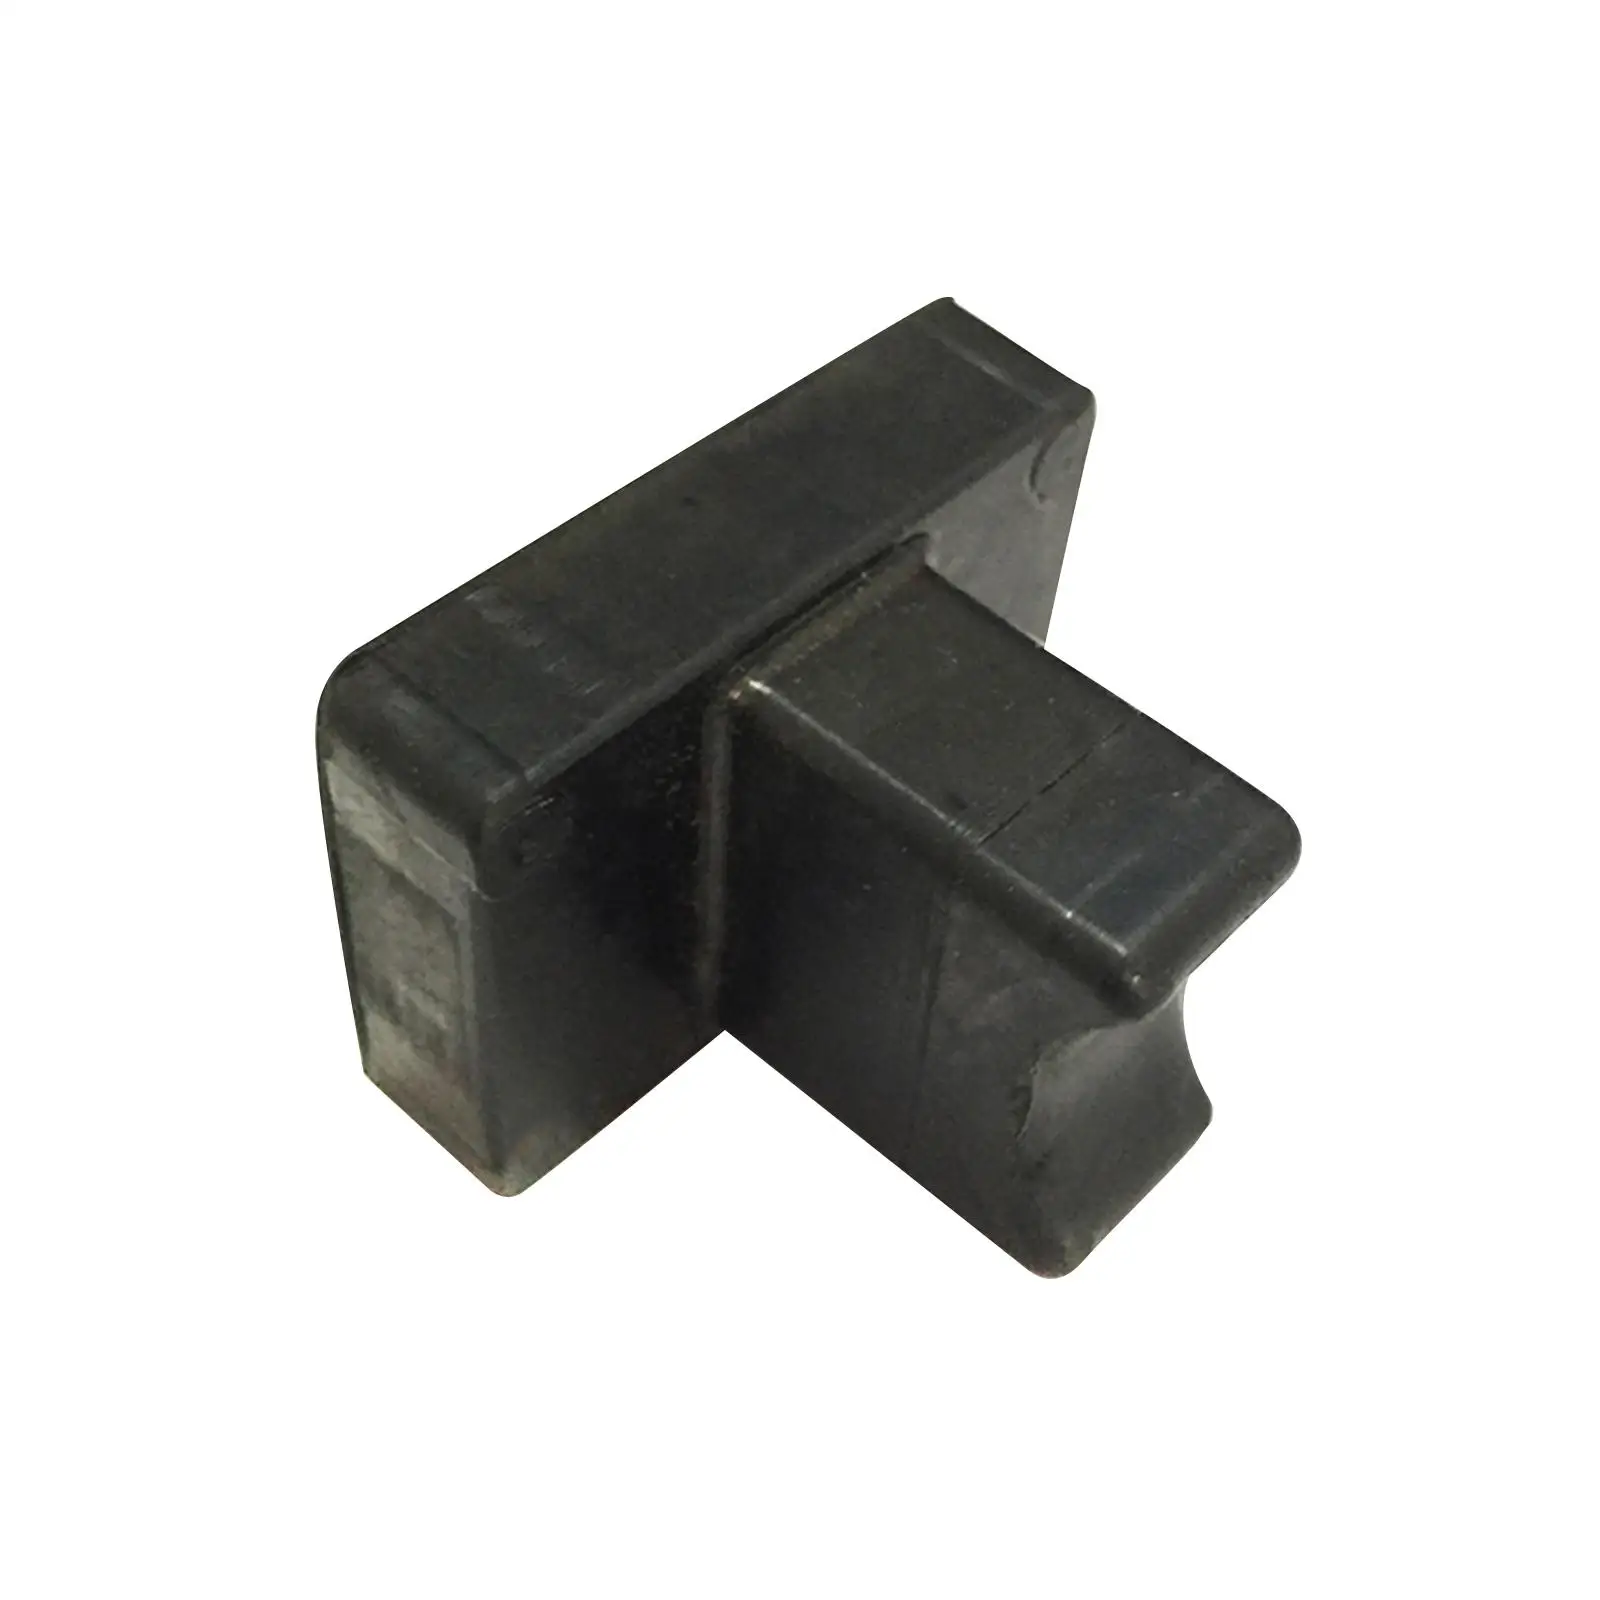 Outboard Motor Rubber Pad Accessories Professional Direct Replaces Rubber Mat 3B2-61336-0-00 for Nissan Outboard Engine